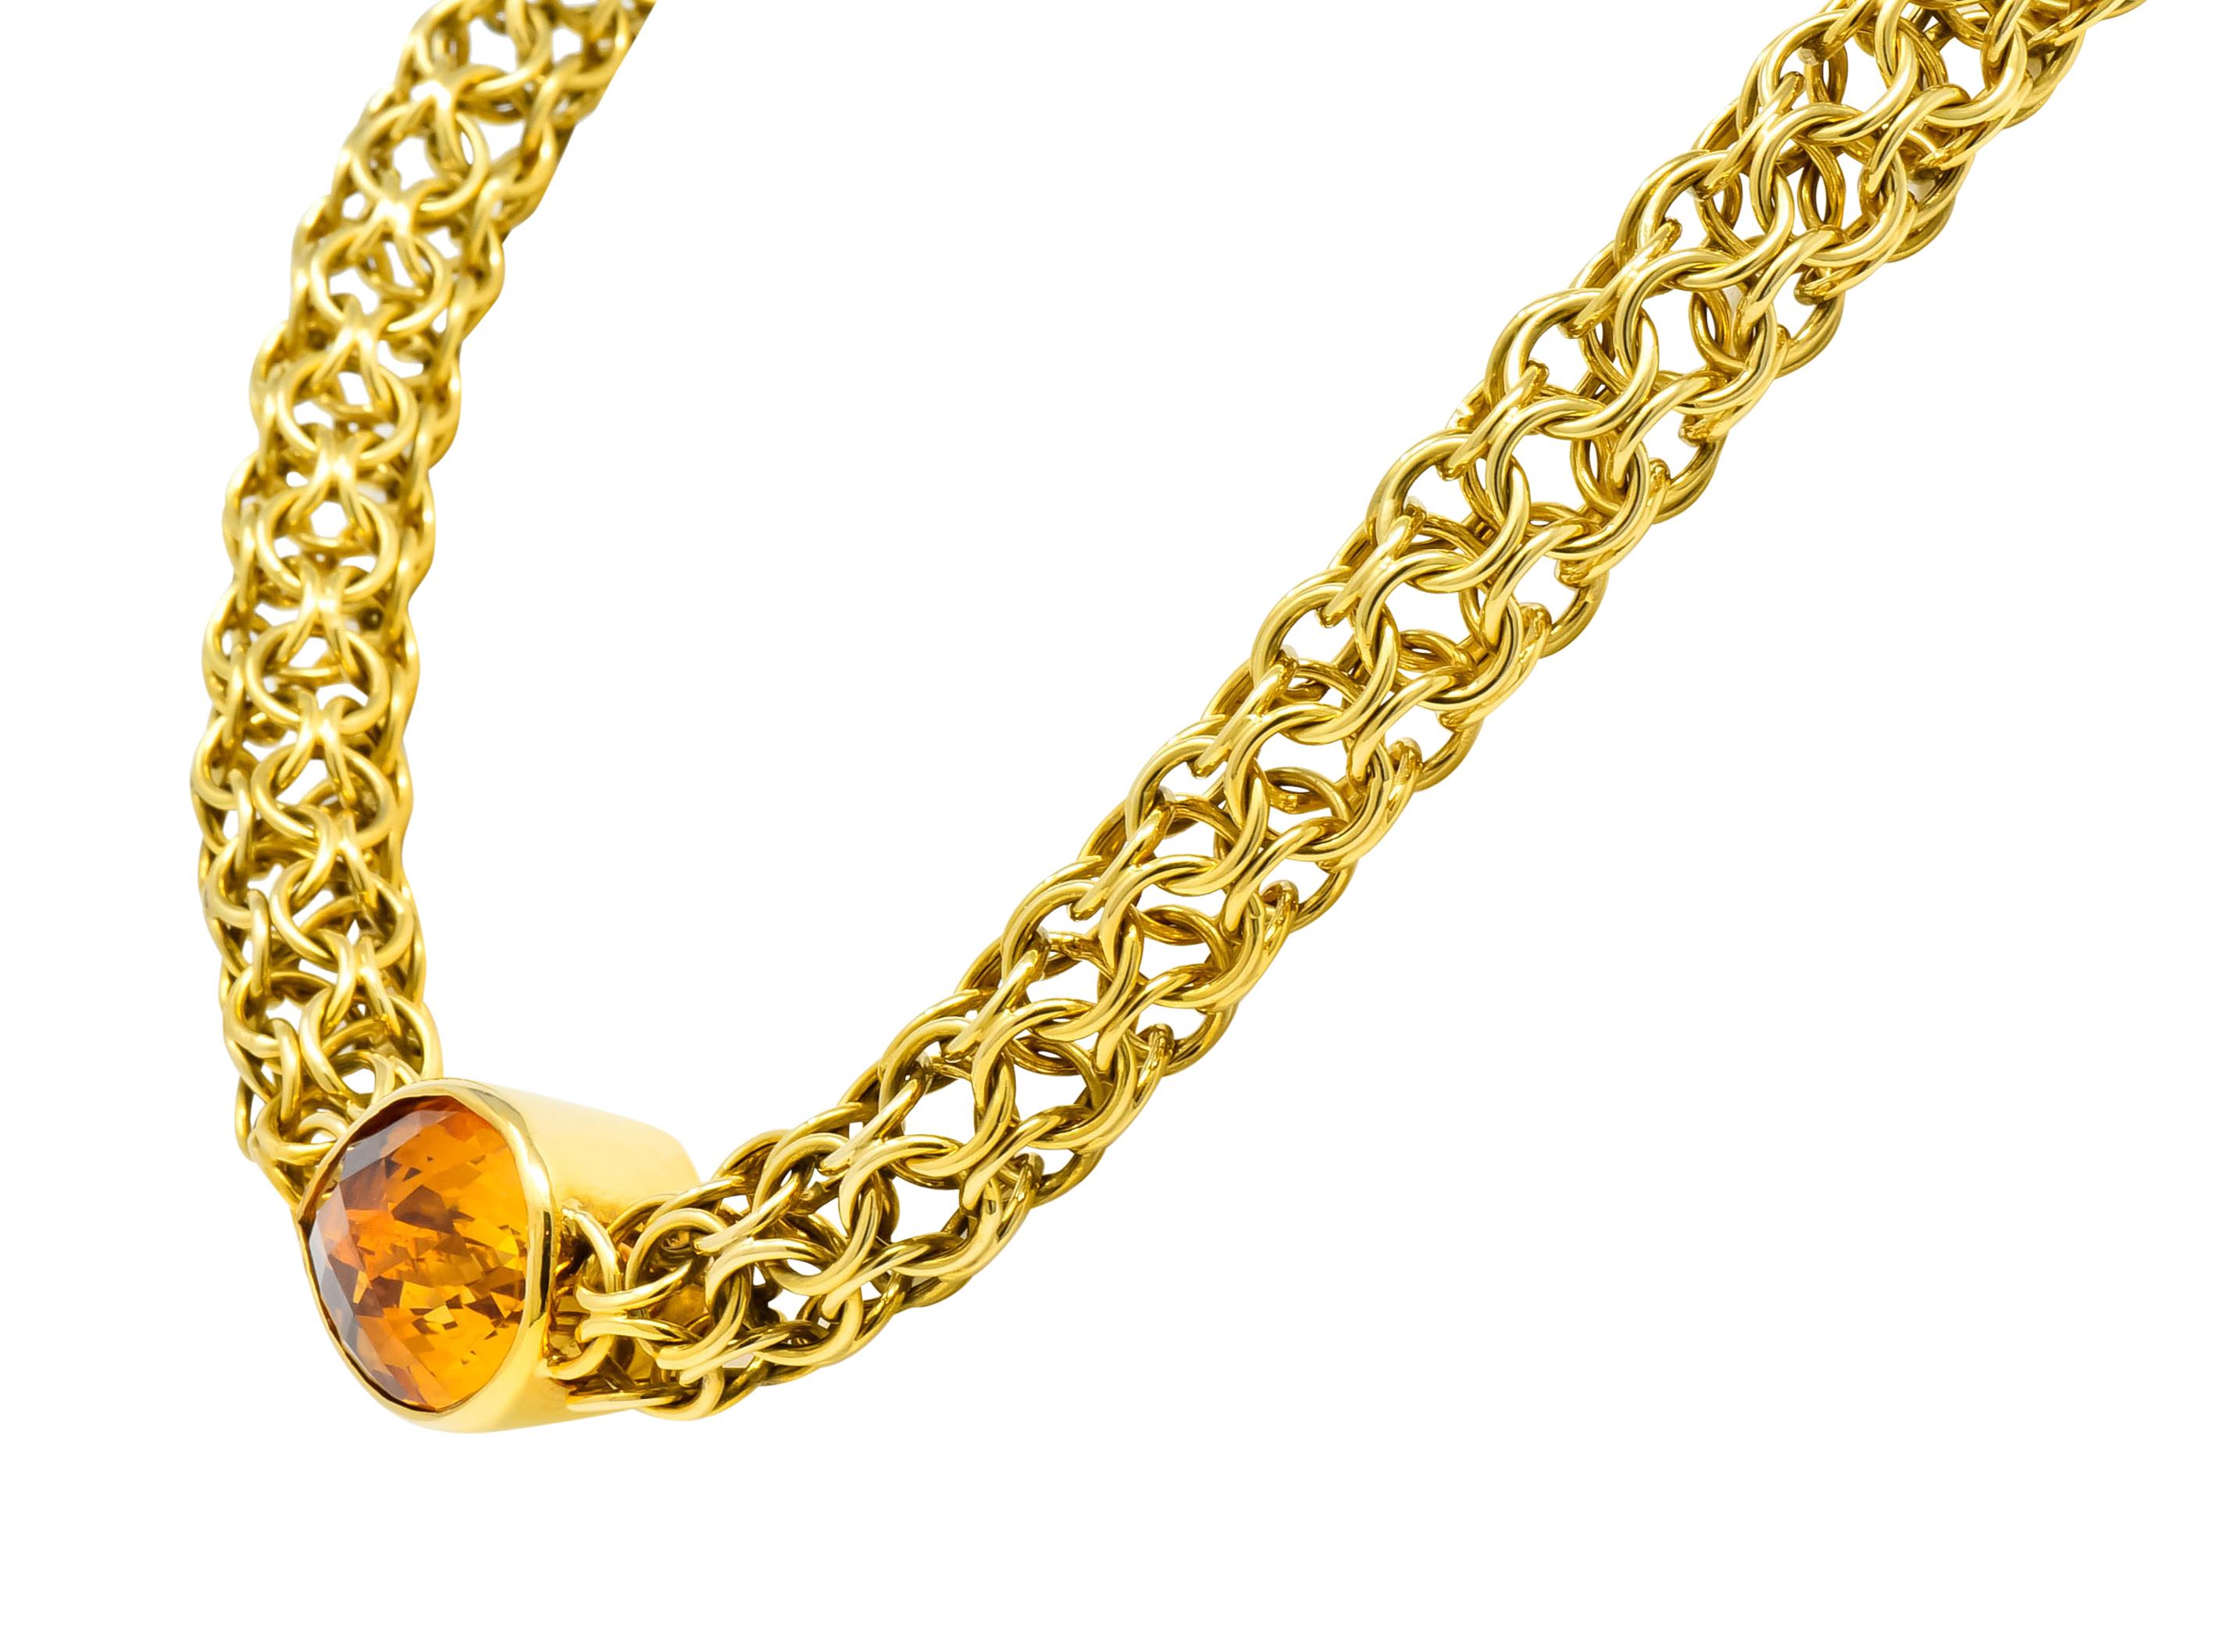 Centering a pear checkerboard mixed cut citrine measuring approximately 3/4 x 1 1/8 inches; transparent and a golden honey color

Bezel set in a polished gold surround flanked by tubular meshed chain comprised of round interconnected jump